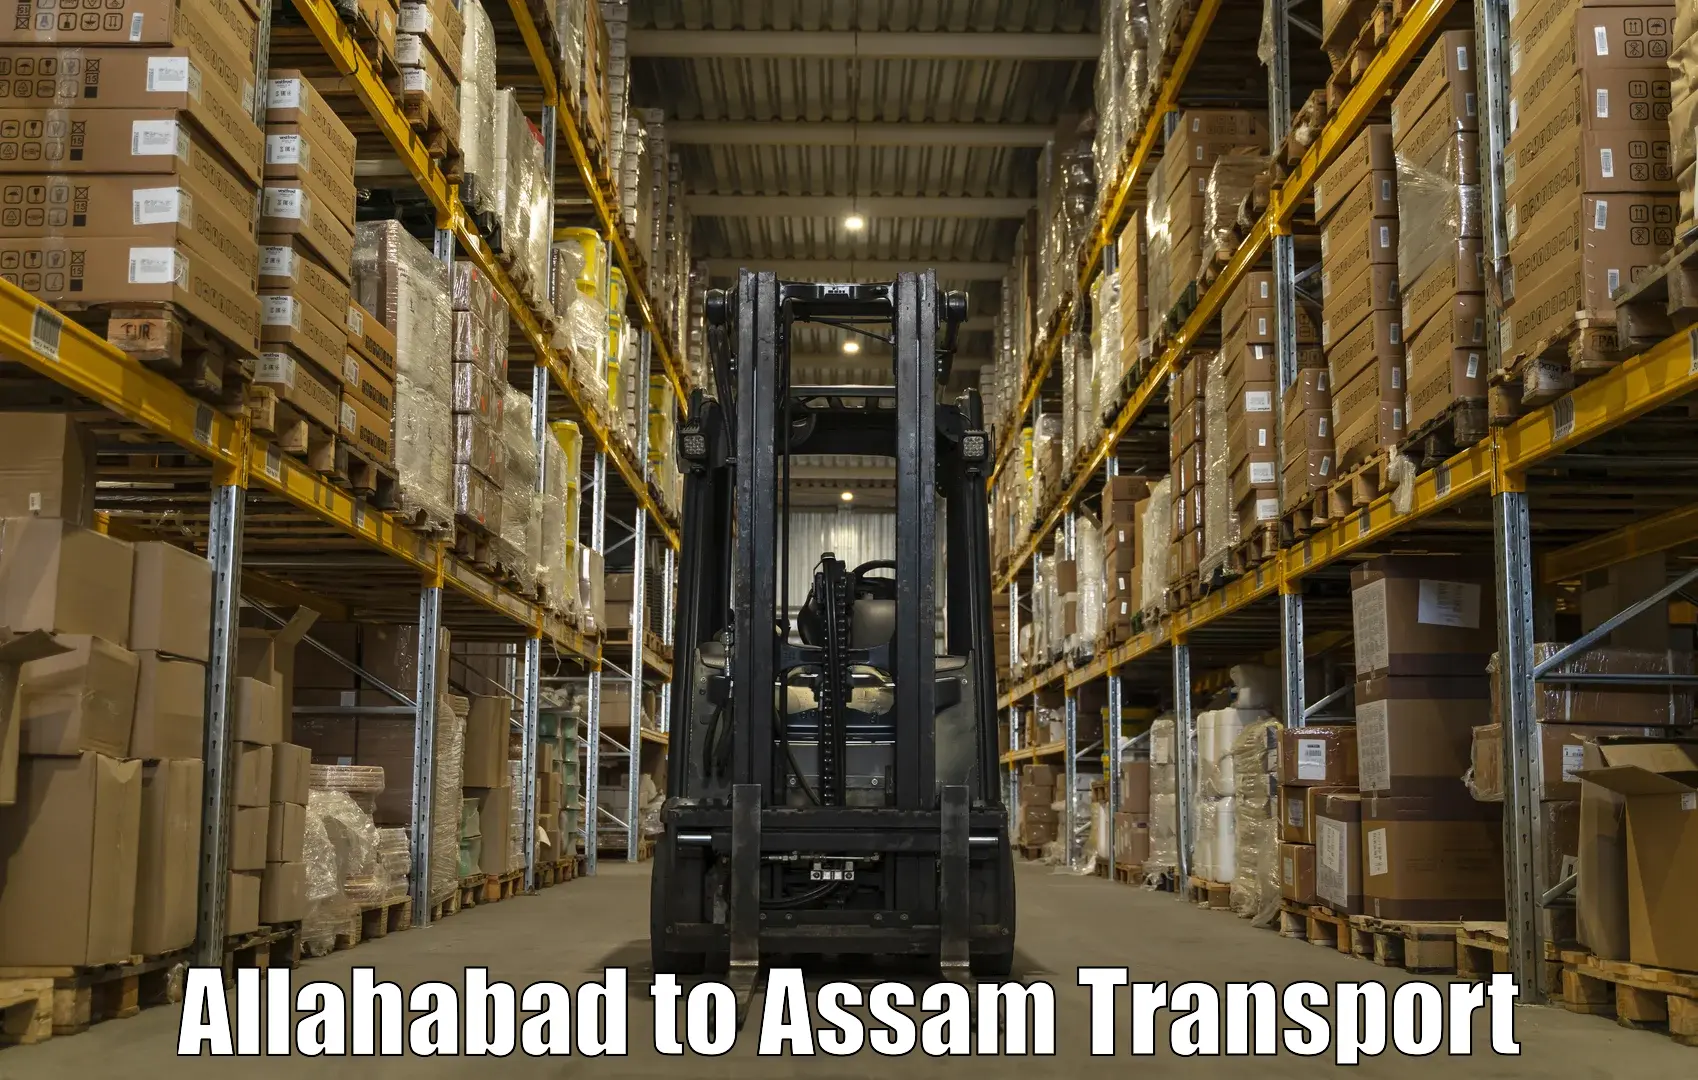 Vehicle parcel service Allahabad to Lala Assam